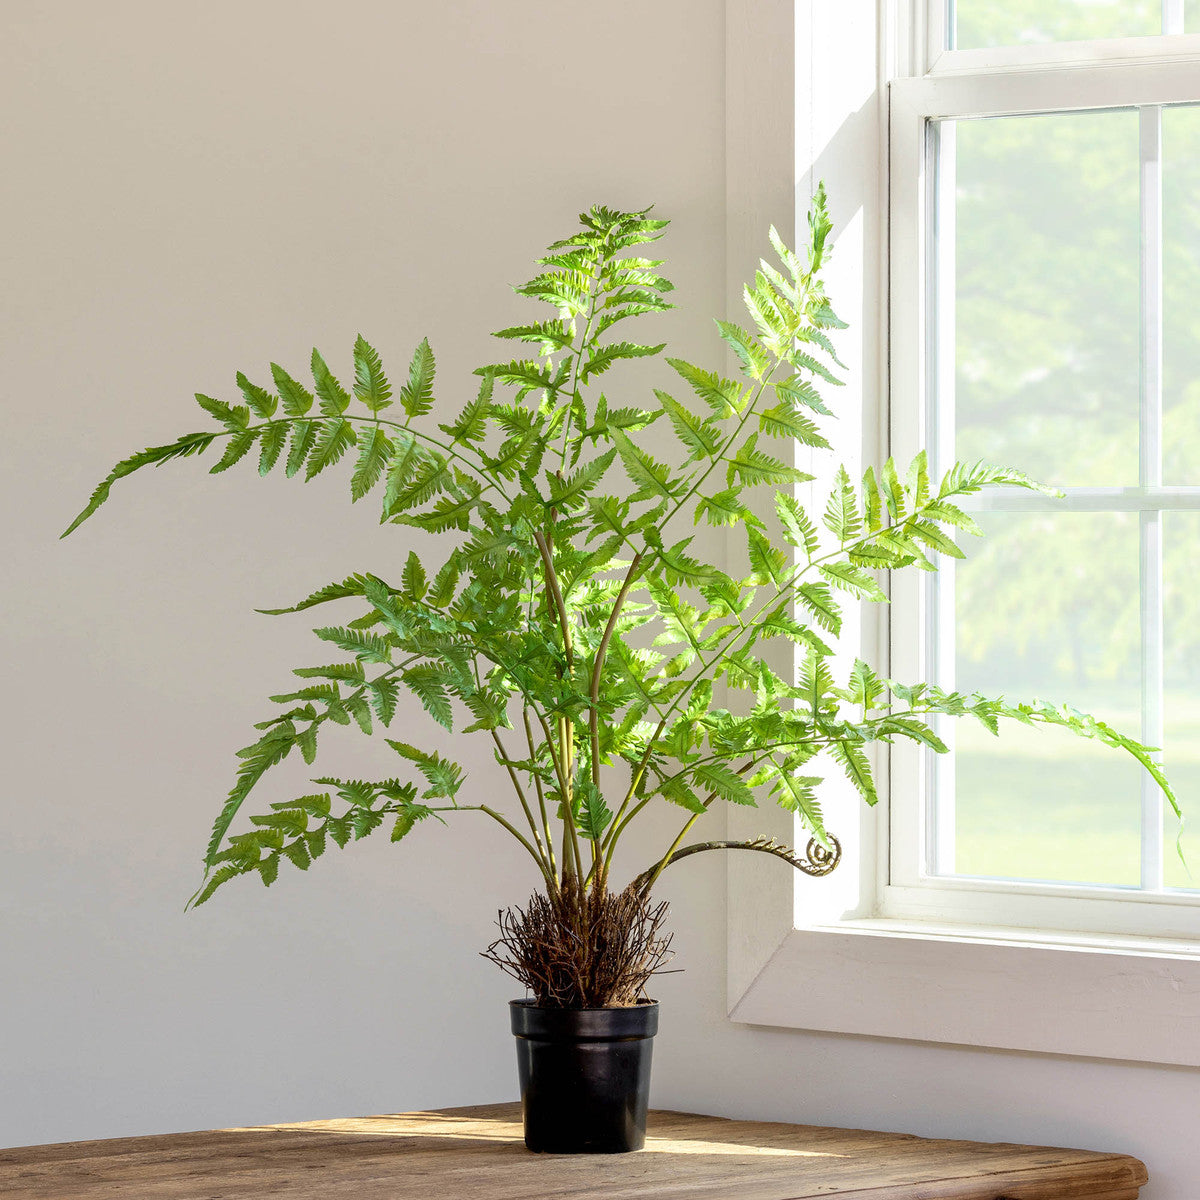 Forest Fern Plant in Growers Pot - Small